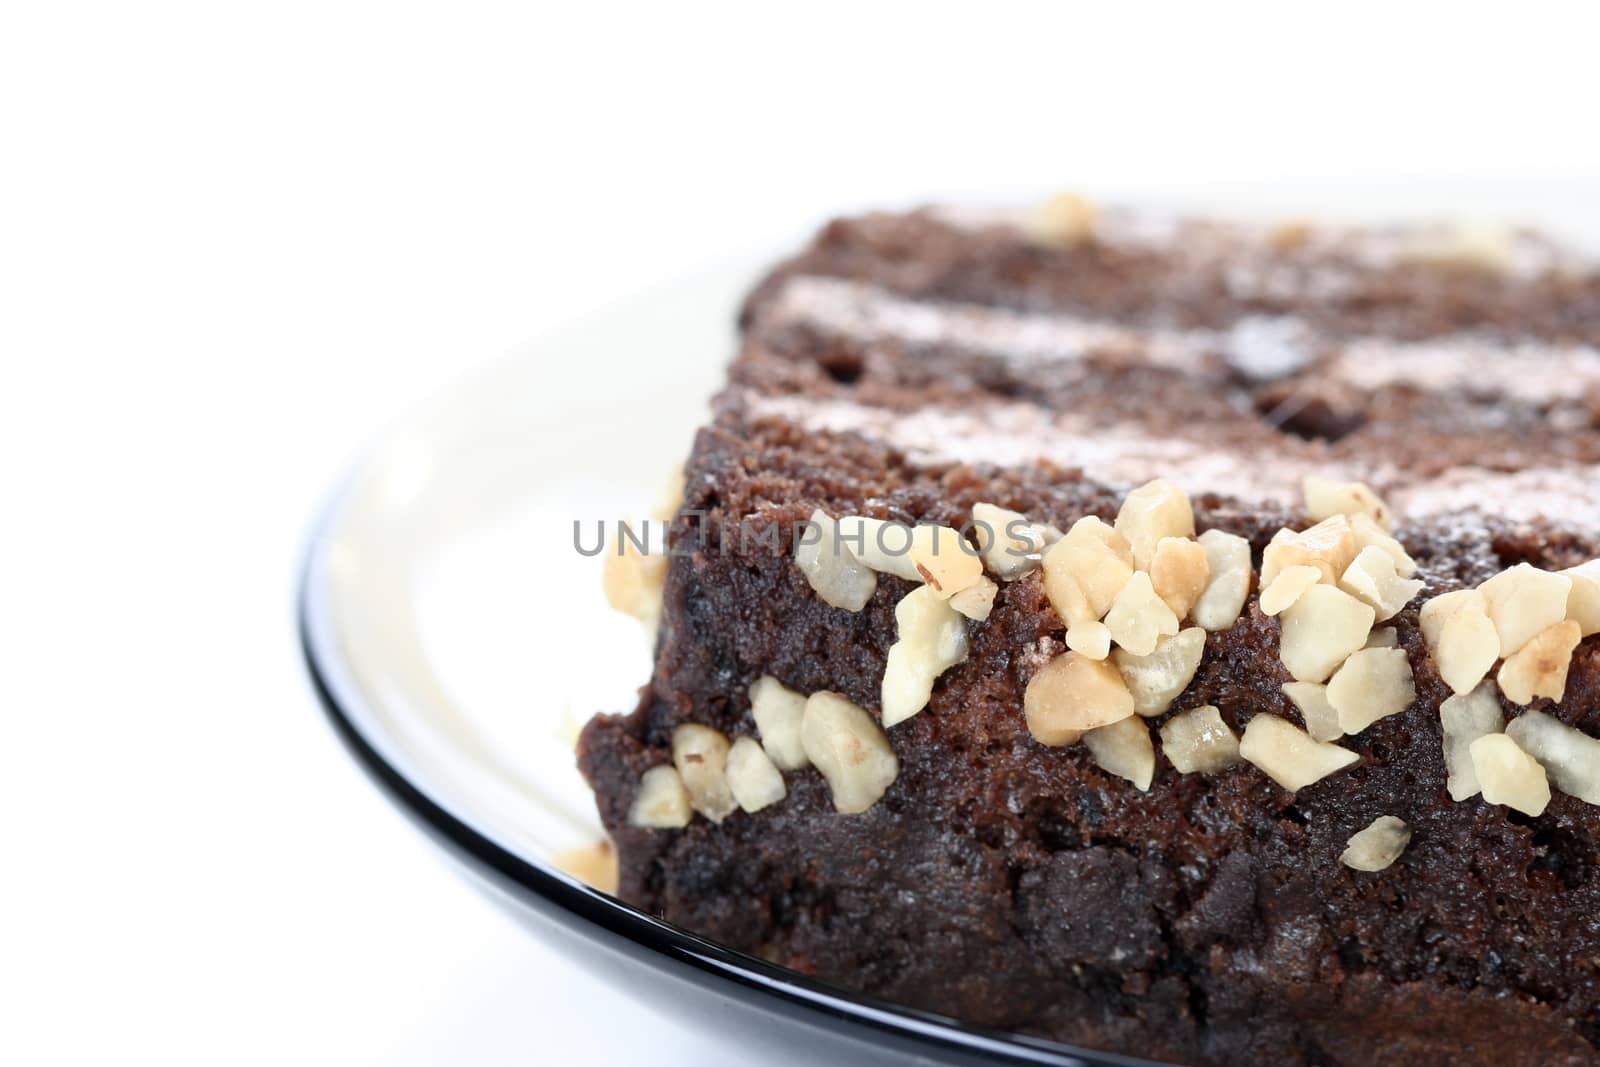 Almond cake with chocolate stuffing